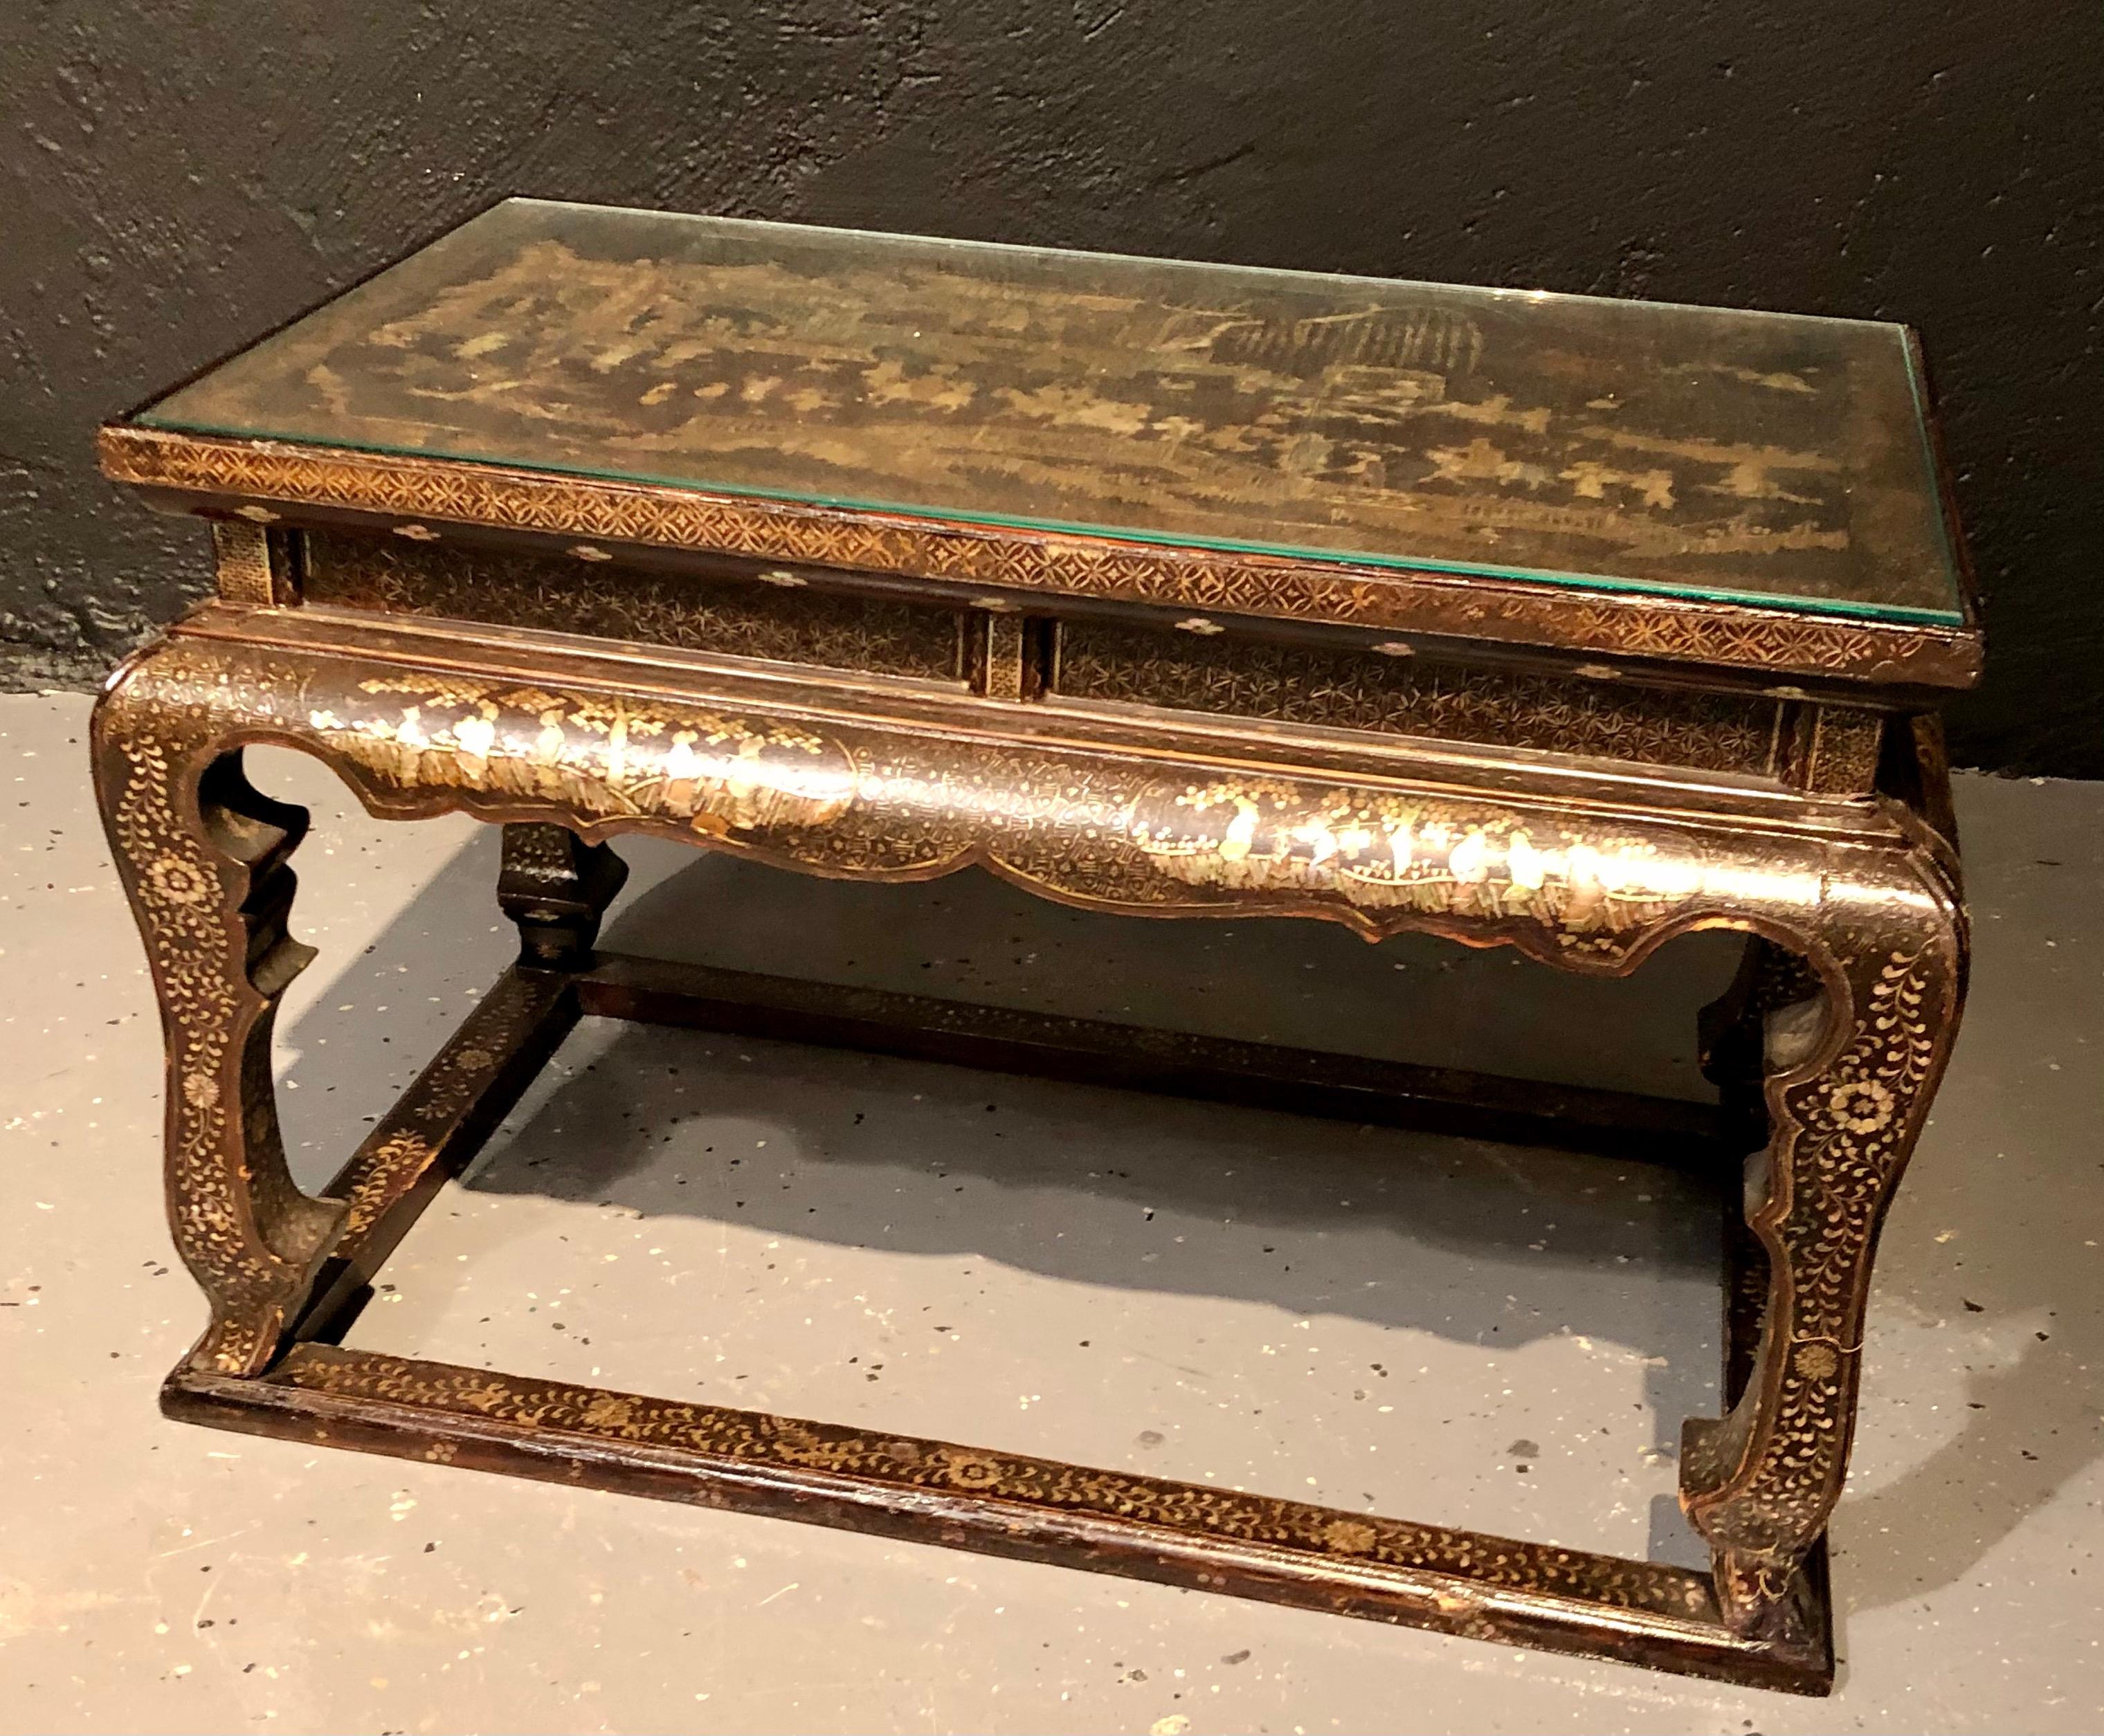 Early 19th century chinoiserie decorated side, coffee table or stool, having mother of pearl inlay. This diminutive end or side table can be used as a stool or coffee table and is as sweet as one could wish for with finely decorated figures and